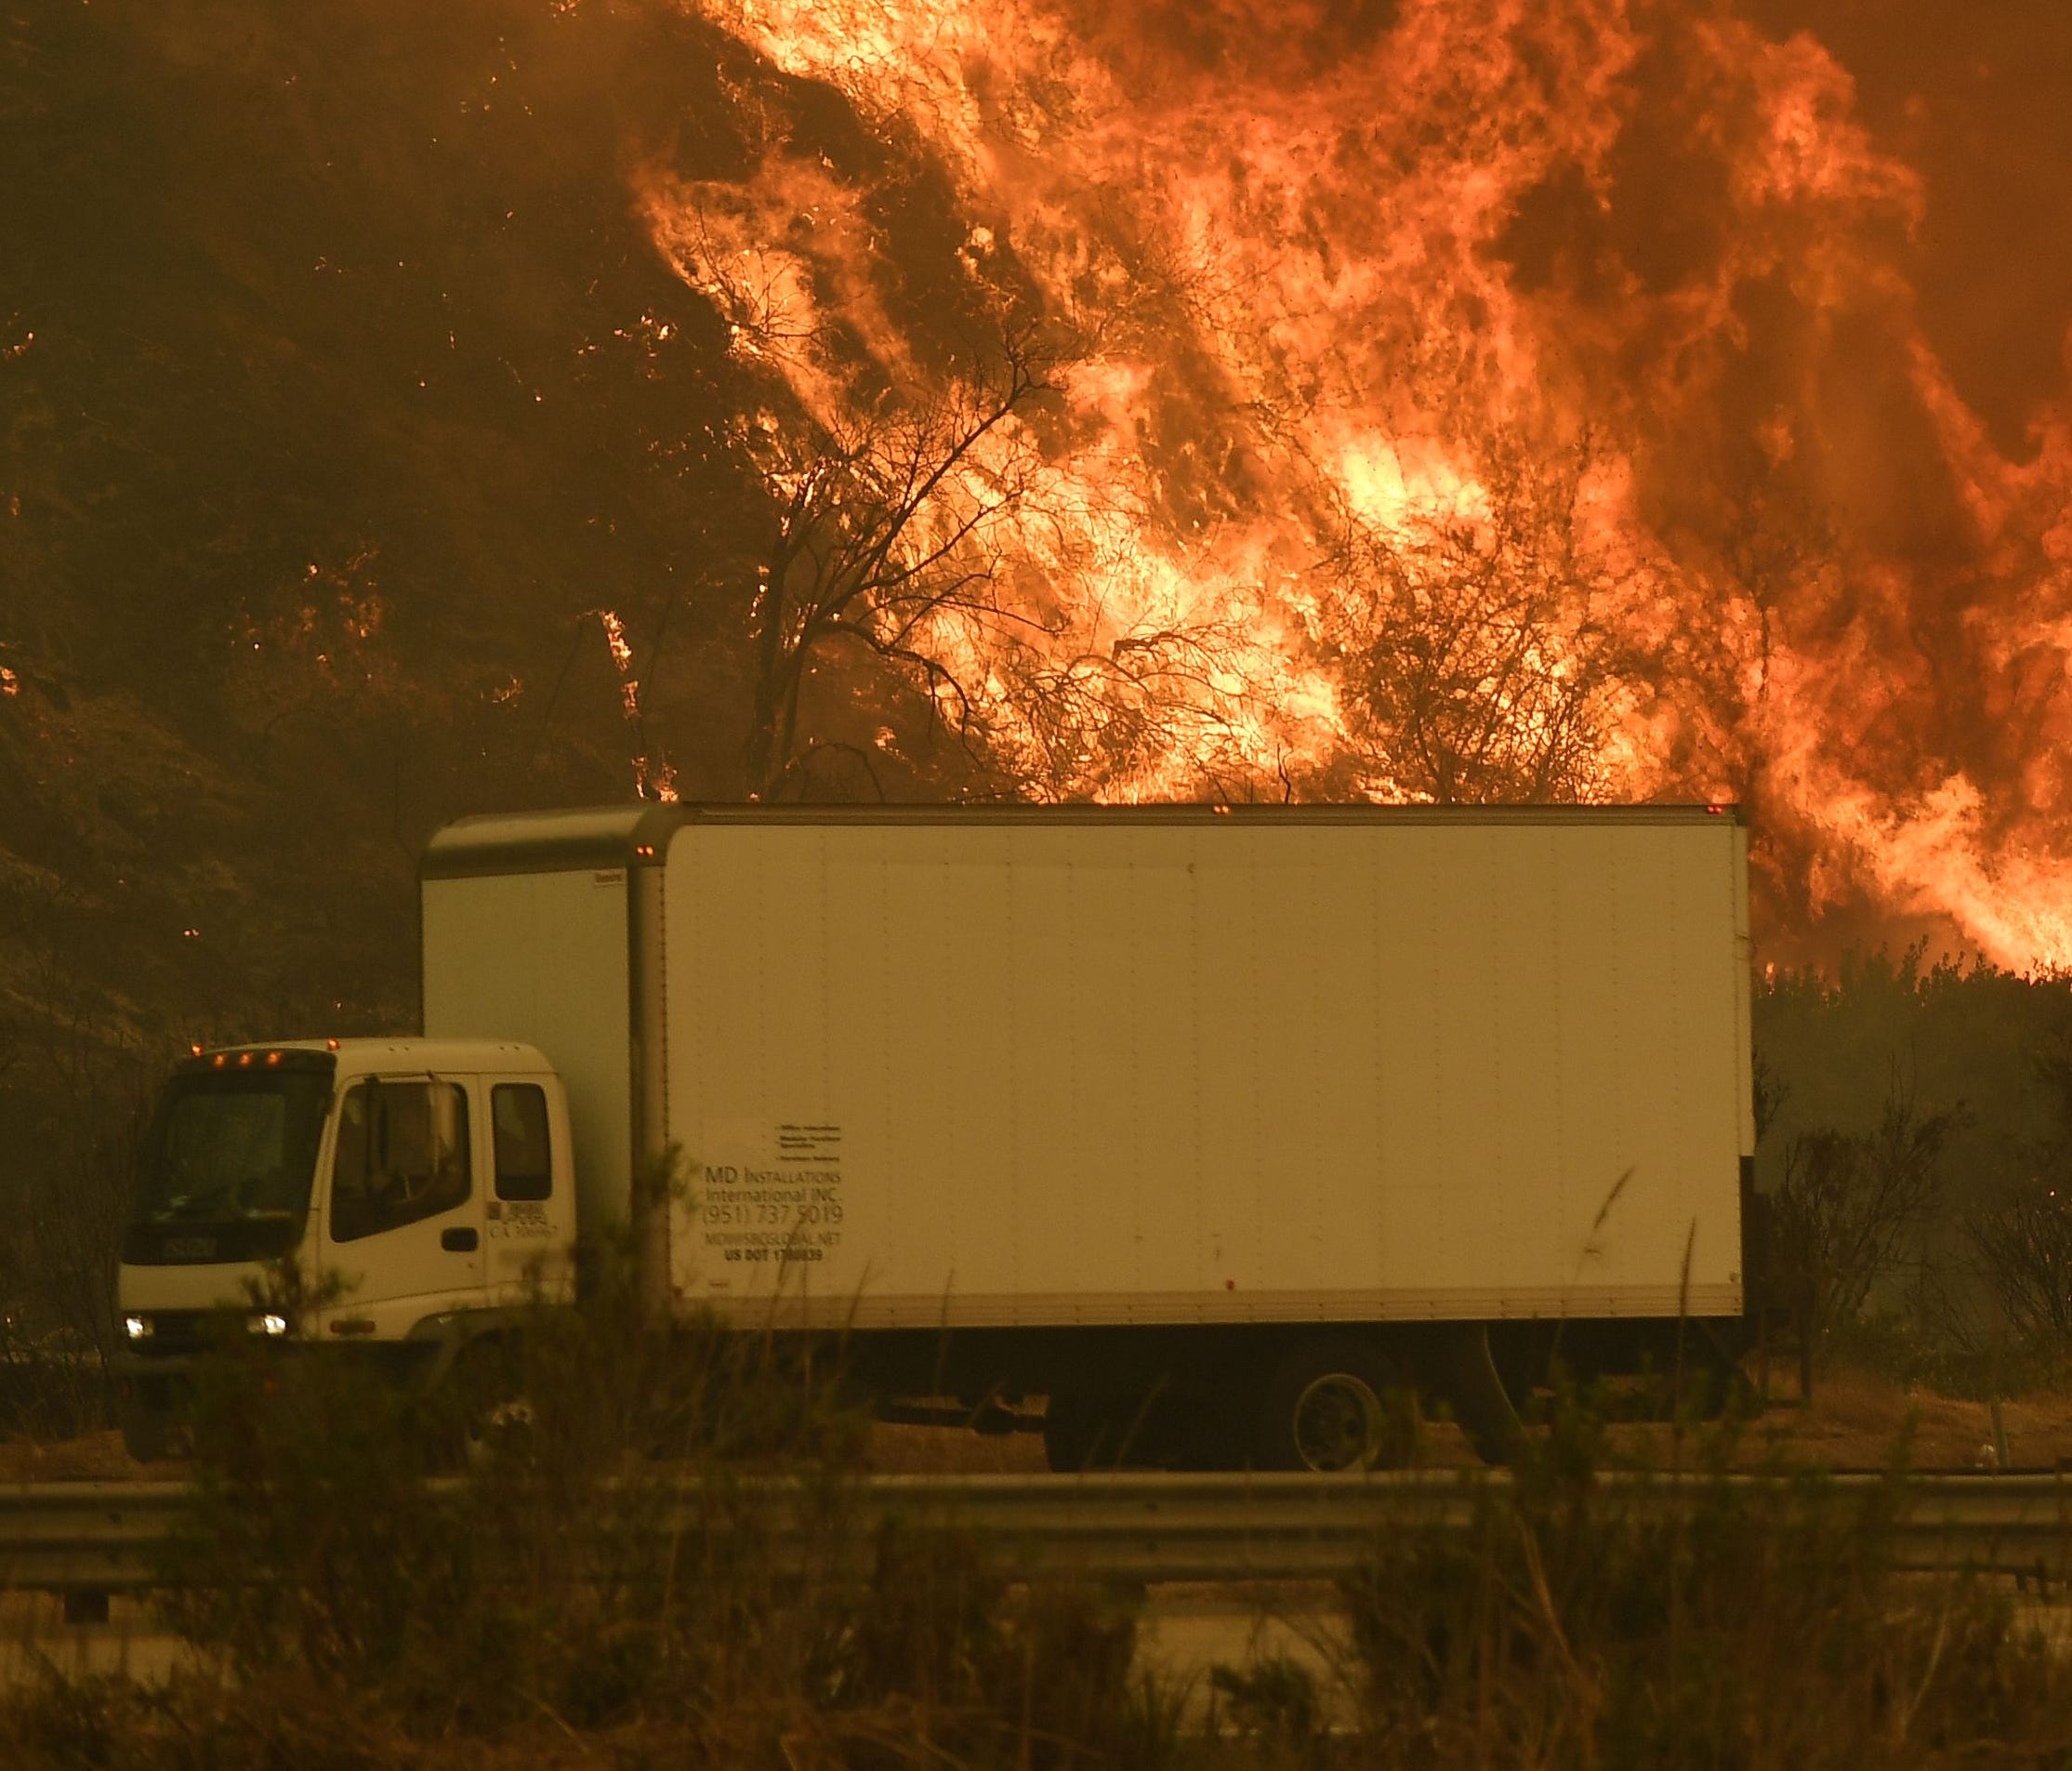 Vehicles pass beside a wall of flames on the 101 highway as it reaches the coast during the Thomas wildfire near Ventura, Calif., on Wednesday.